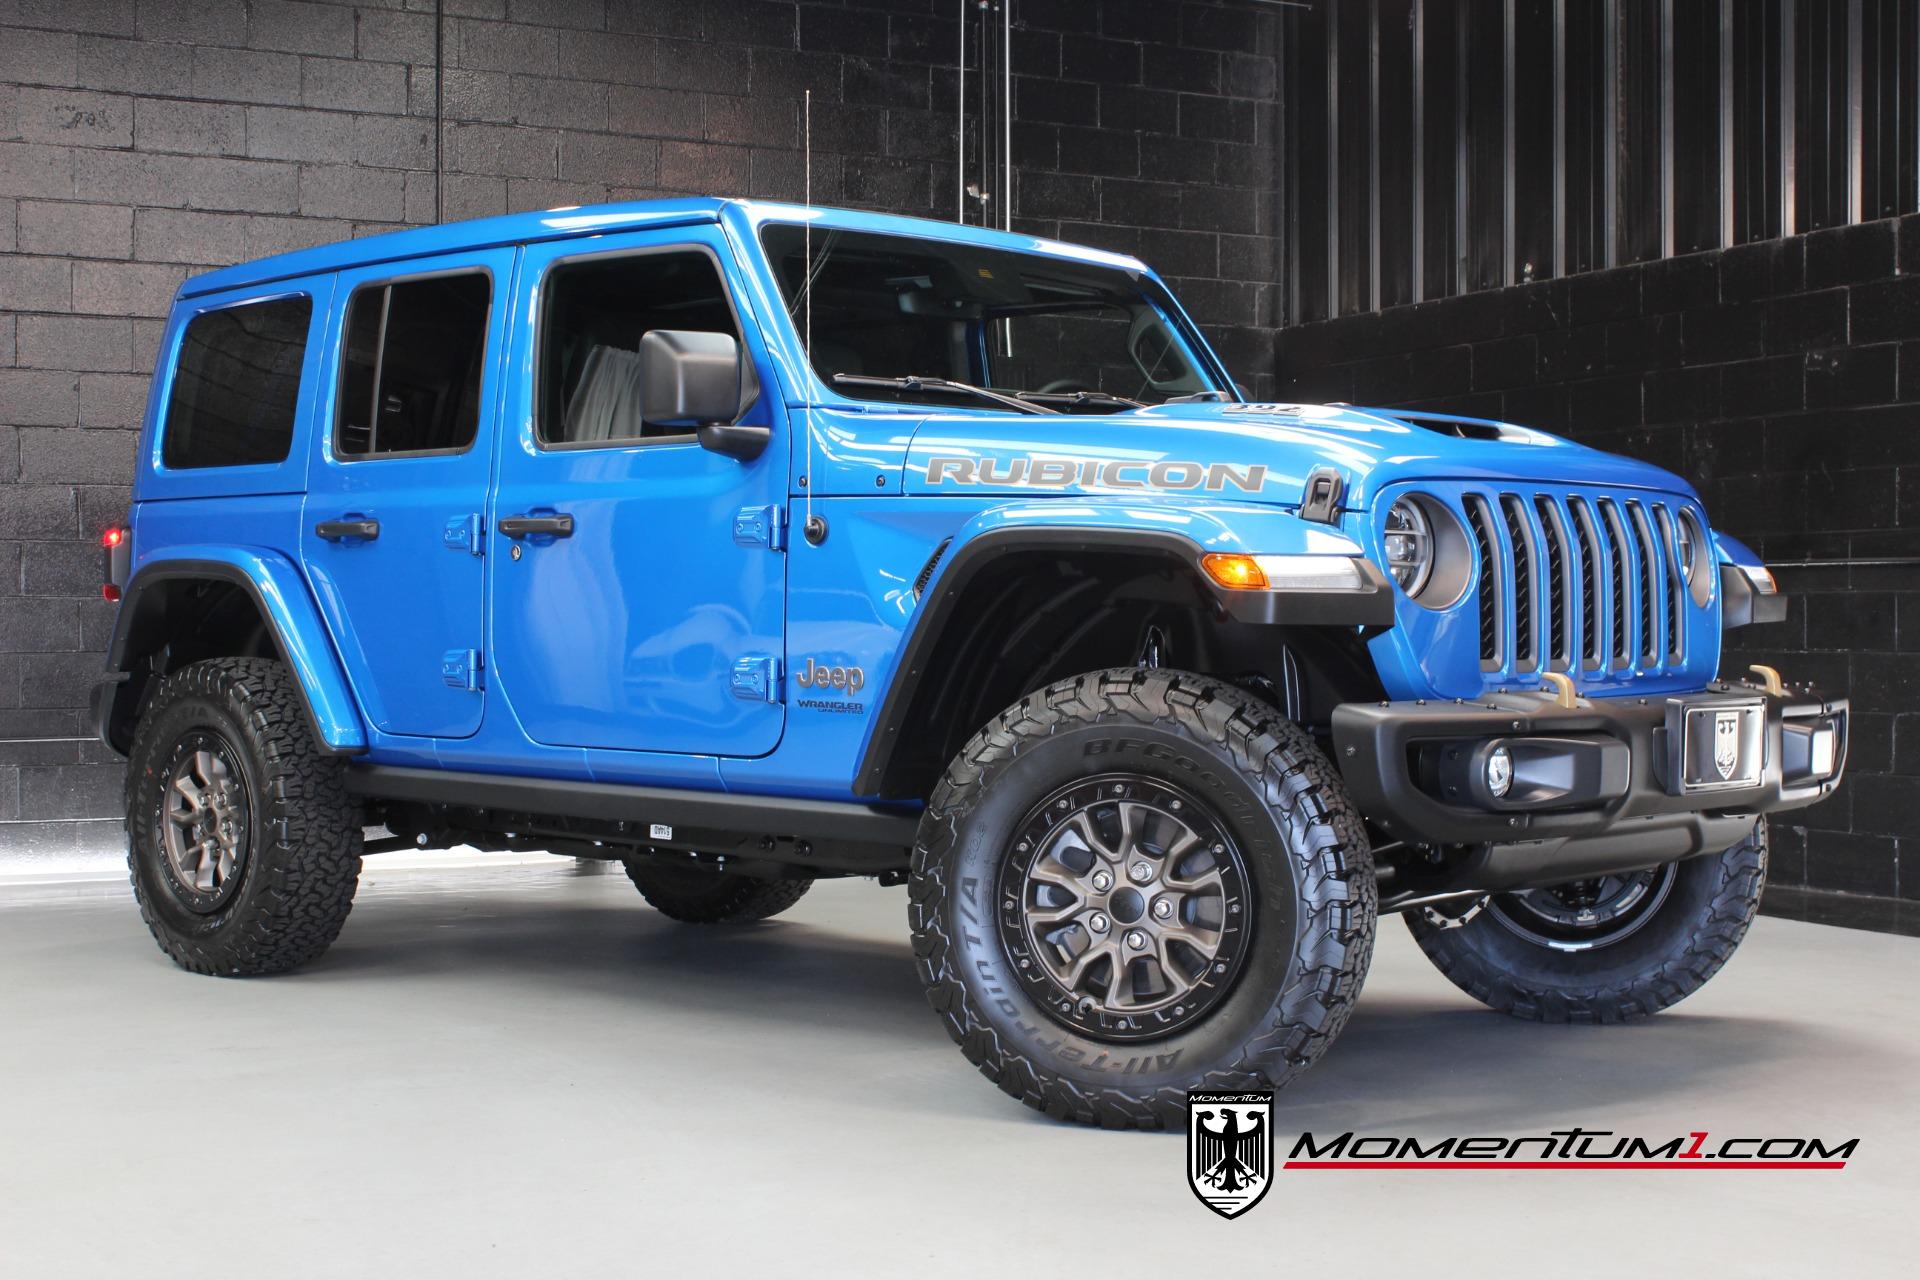 Used 2021 Jeep Wrangler Unlimited Rubicon 392 Skyview Roof For Sale (Sold)  | Momentum Motorcars Inc Stock #852129